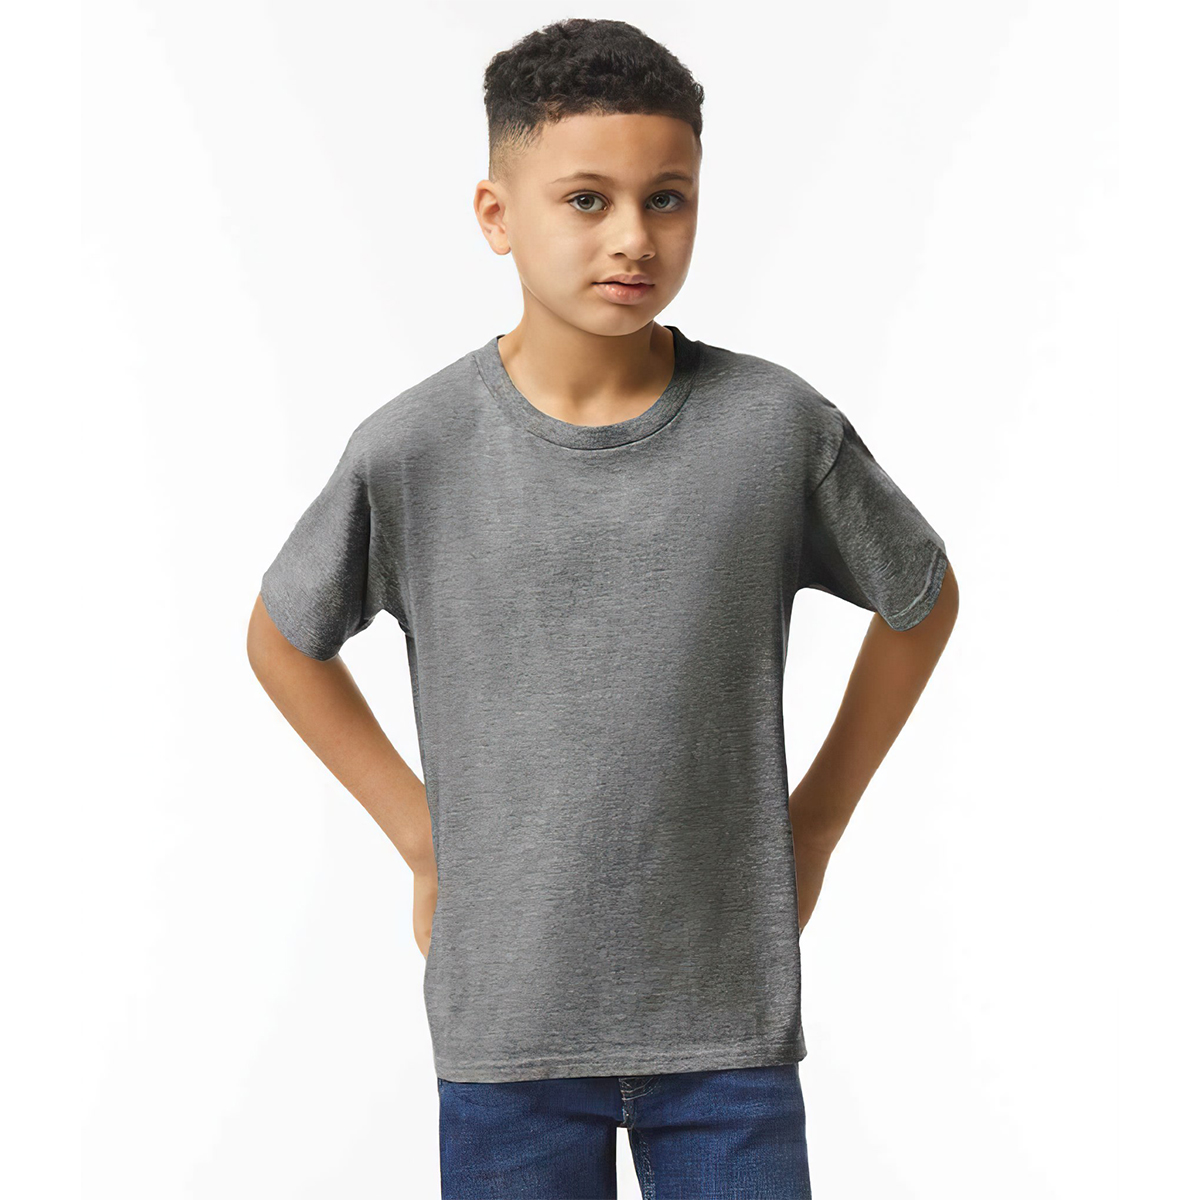 Quality Cotton for Kids: Get the Gildan SoftStyle® Youth T-Shirt

garms360.co.uk/product/gildan…

#KidComfort #SoftStyleSquad #DurableDesigns #RingSpunCotton #ColorfulKids #StylishYoungsters #GildanTShirt #PlaytimeEssentials #FashionForKids #QualityThreads